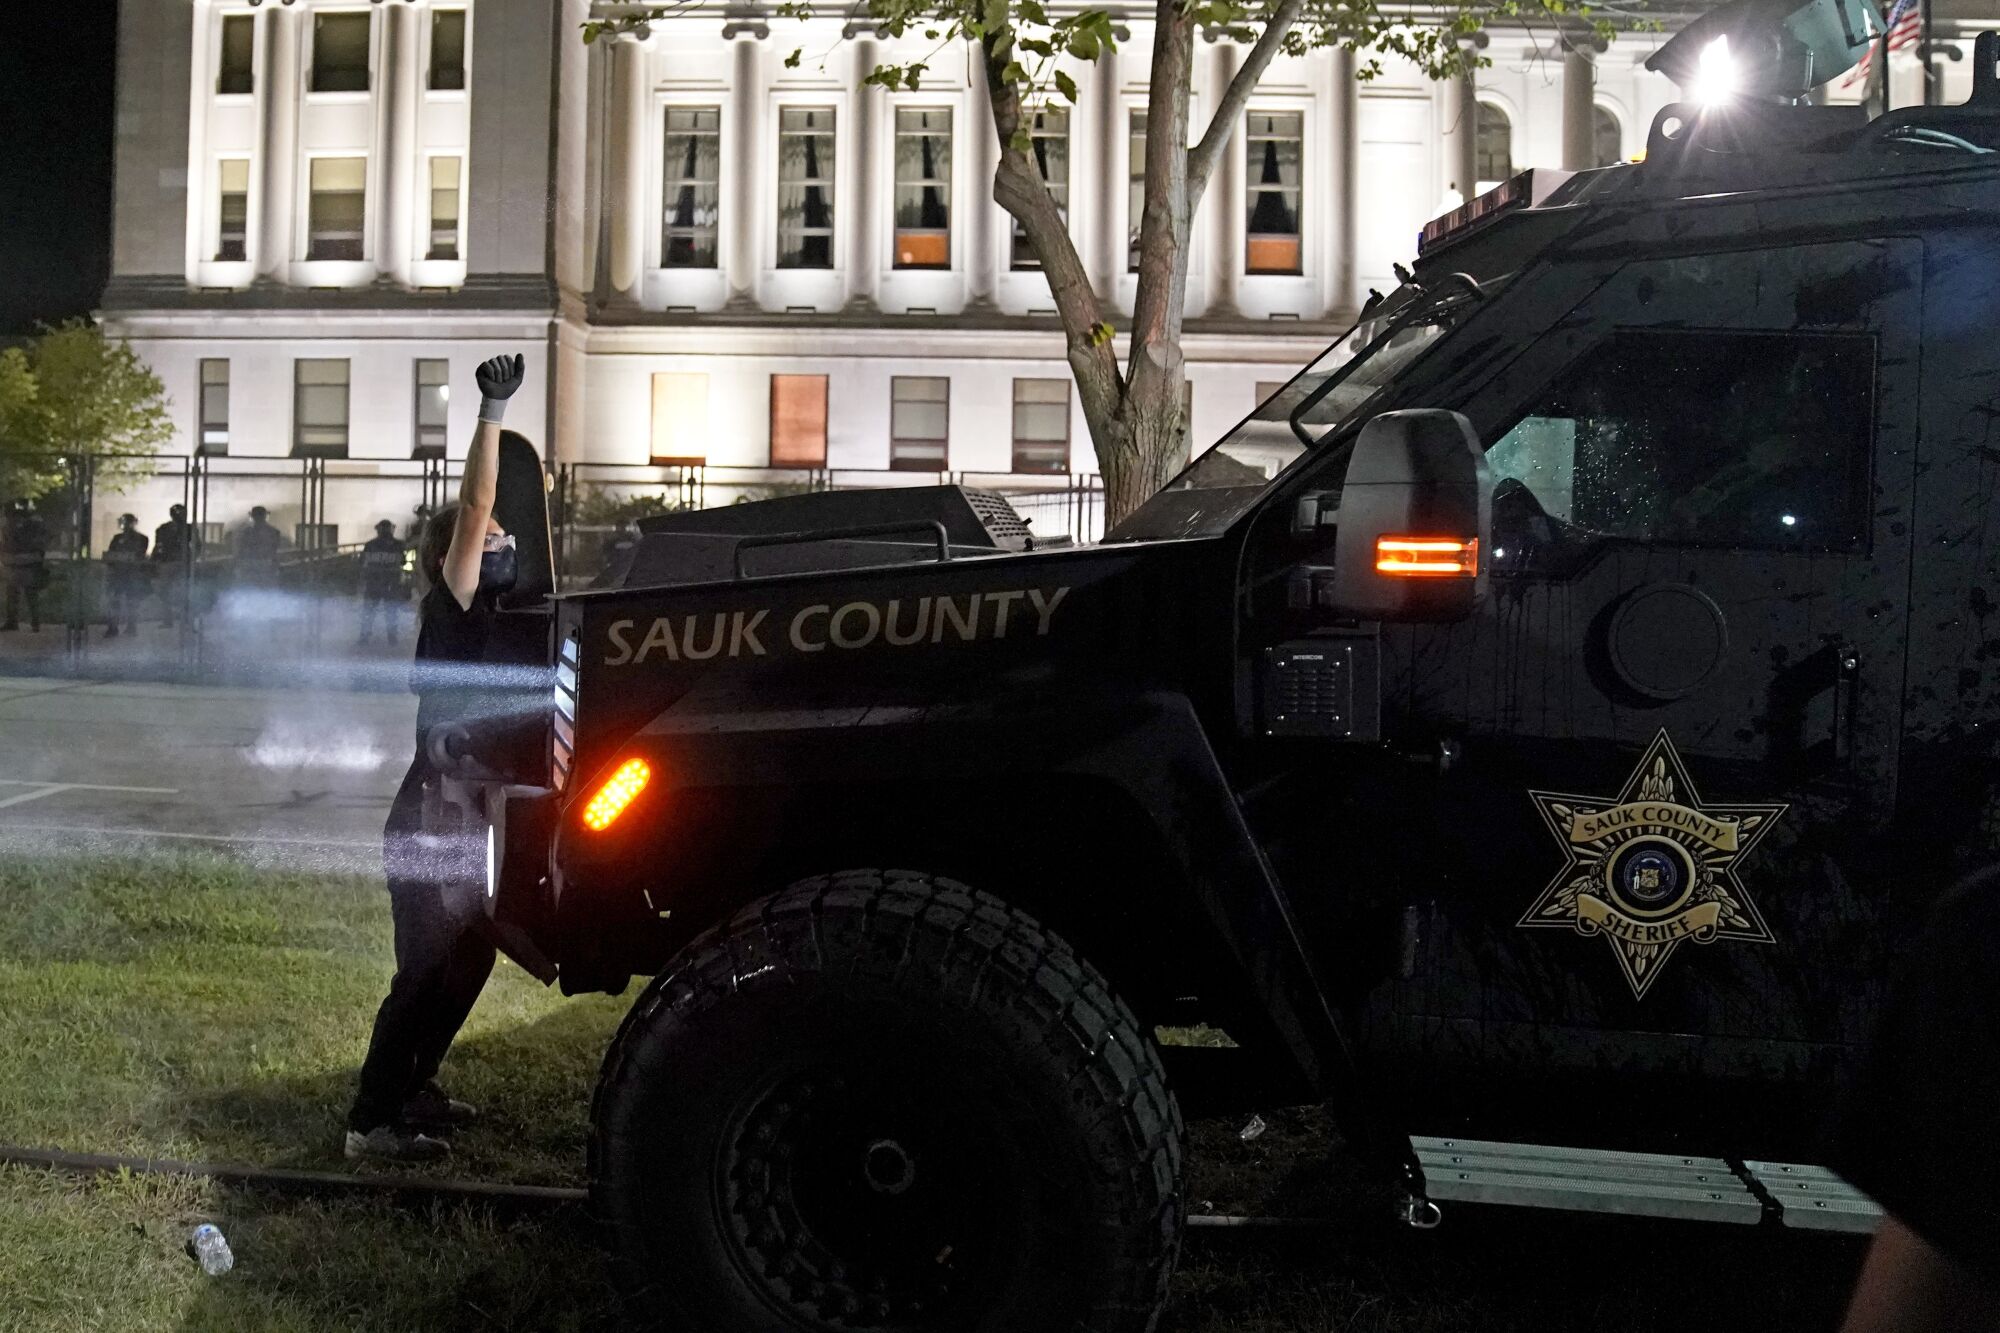 A protester stands in front of an armored vehicle trying to clear a park of demonstrators.